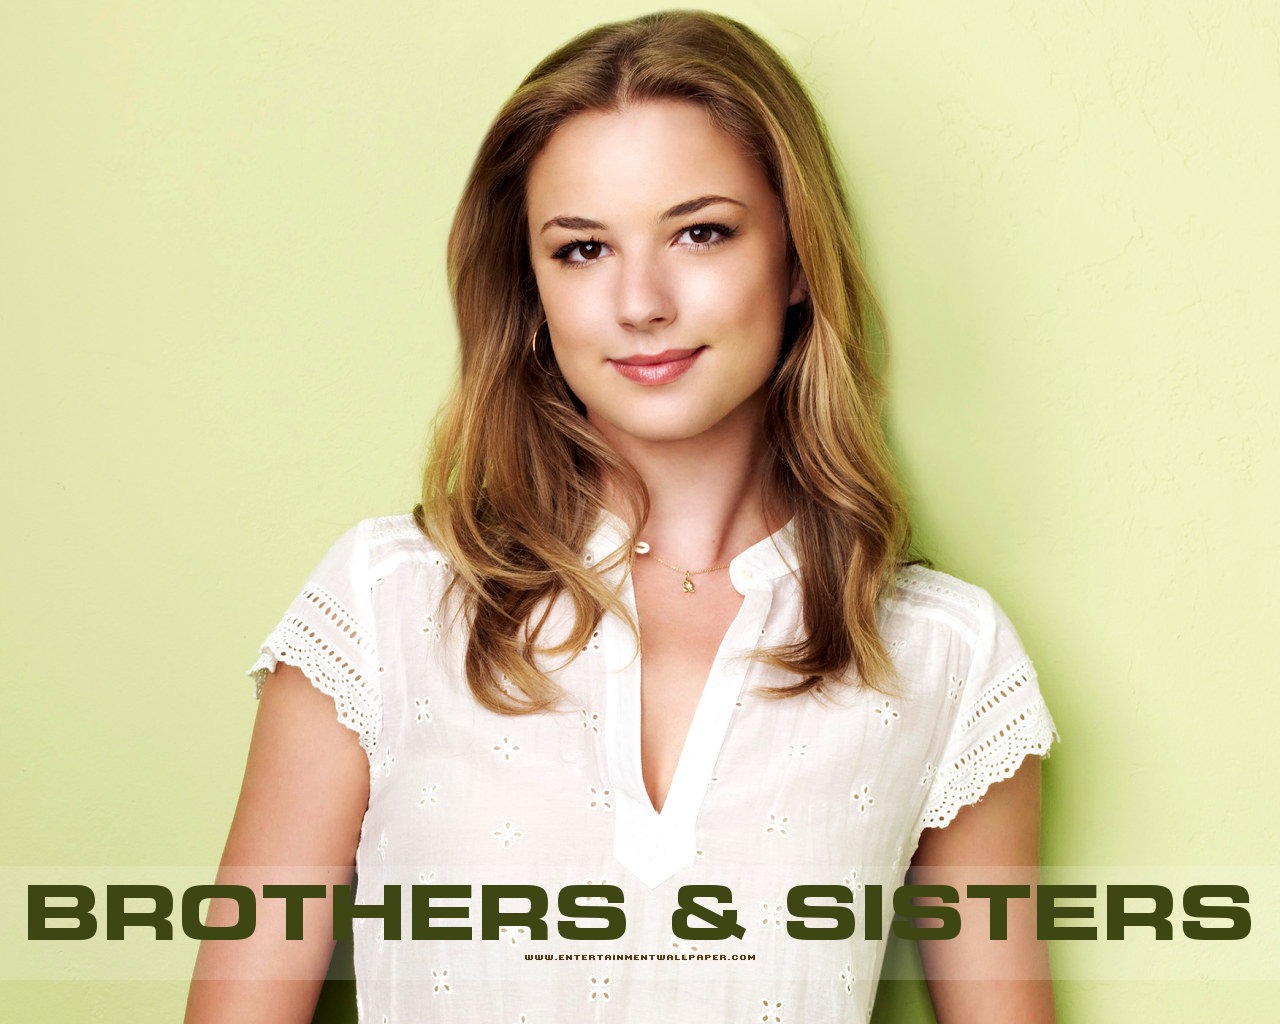 Brothers & Sisters 兄弟姐妹 #15 - 1280x1024